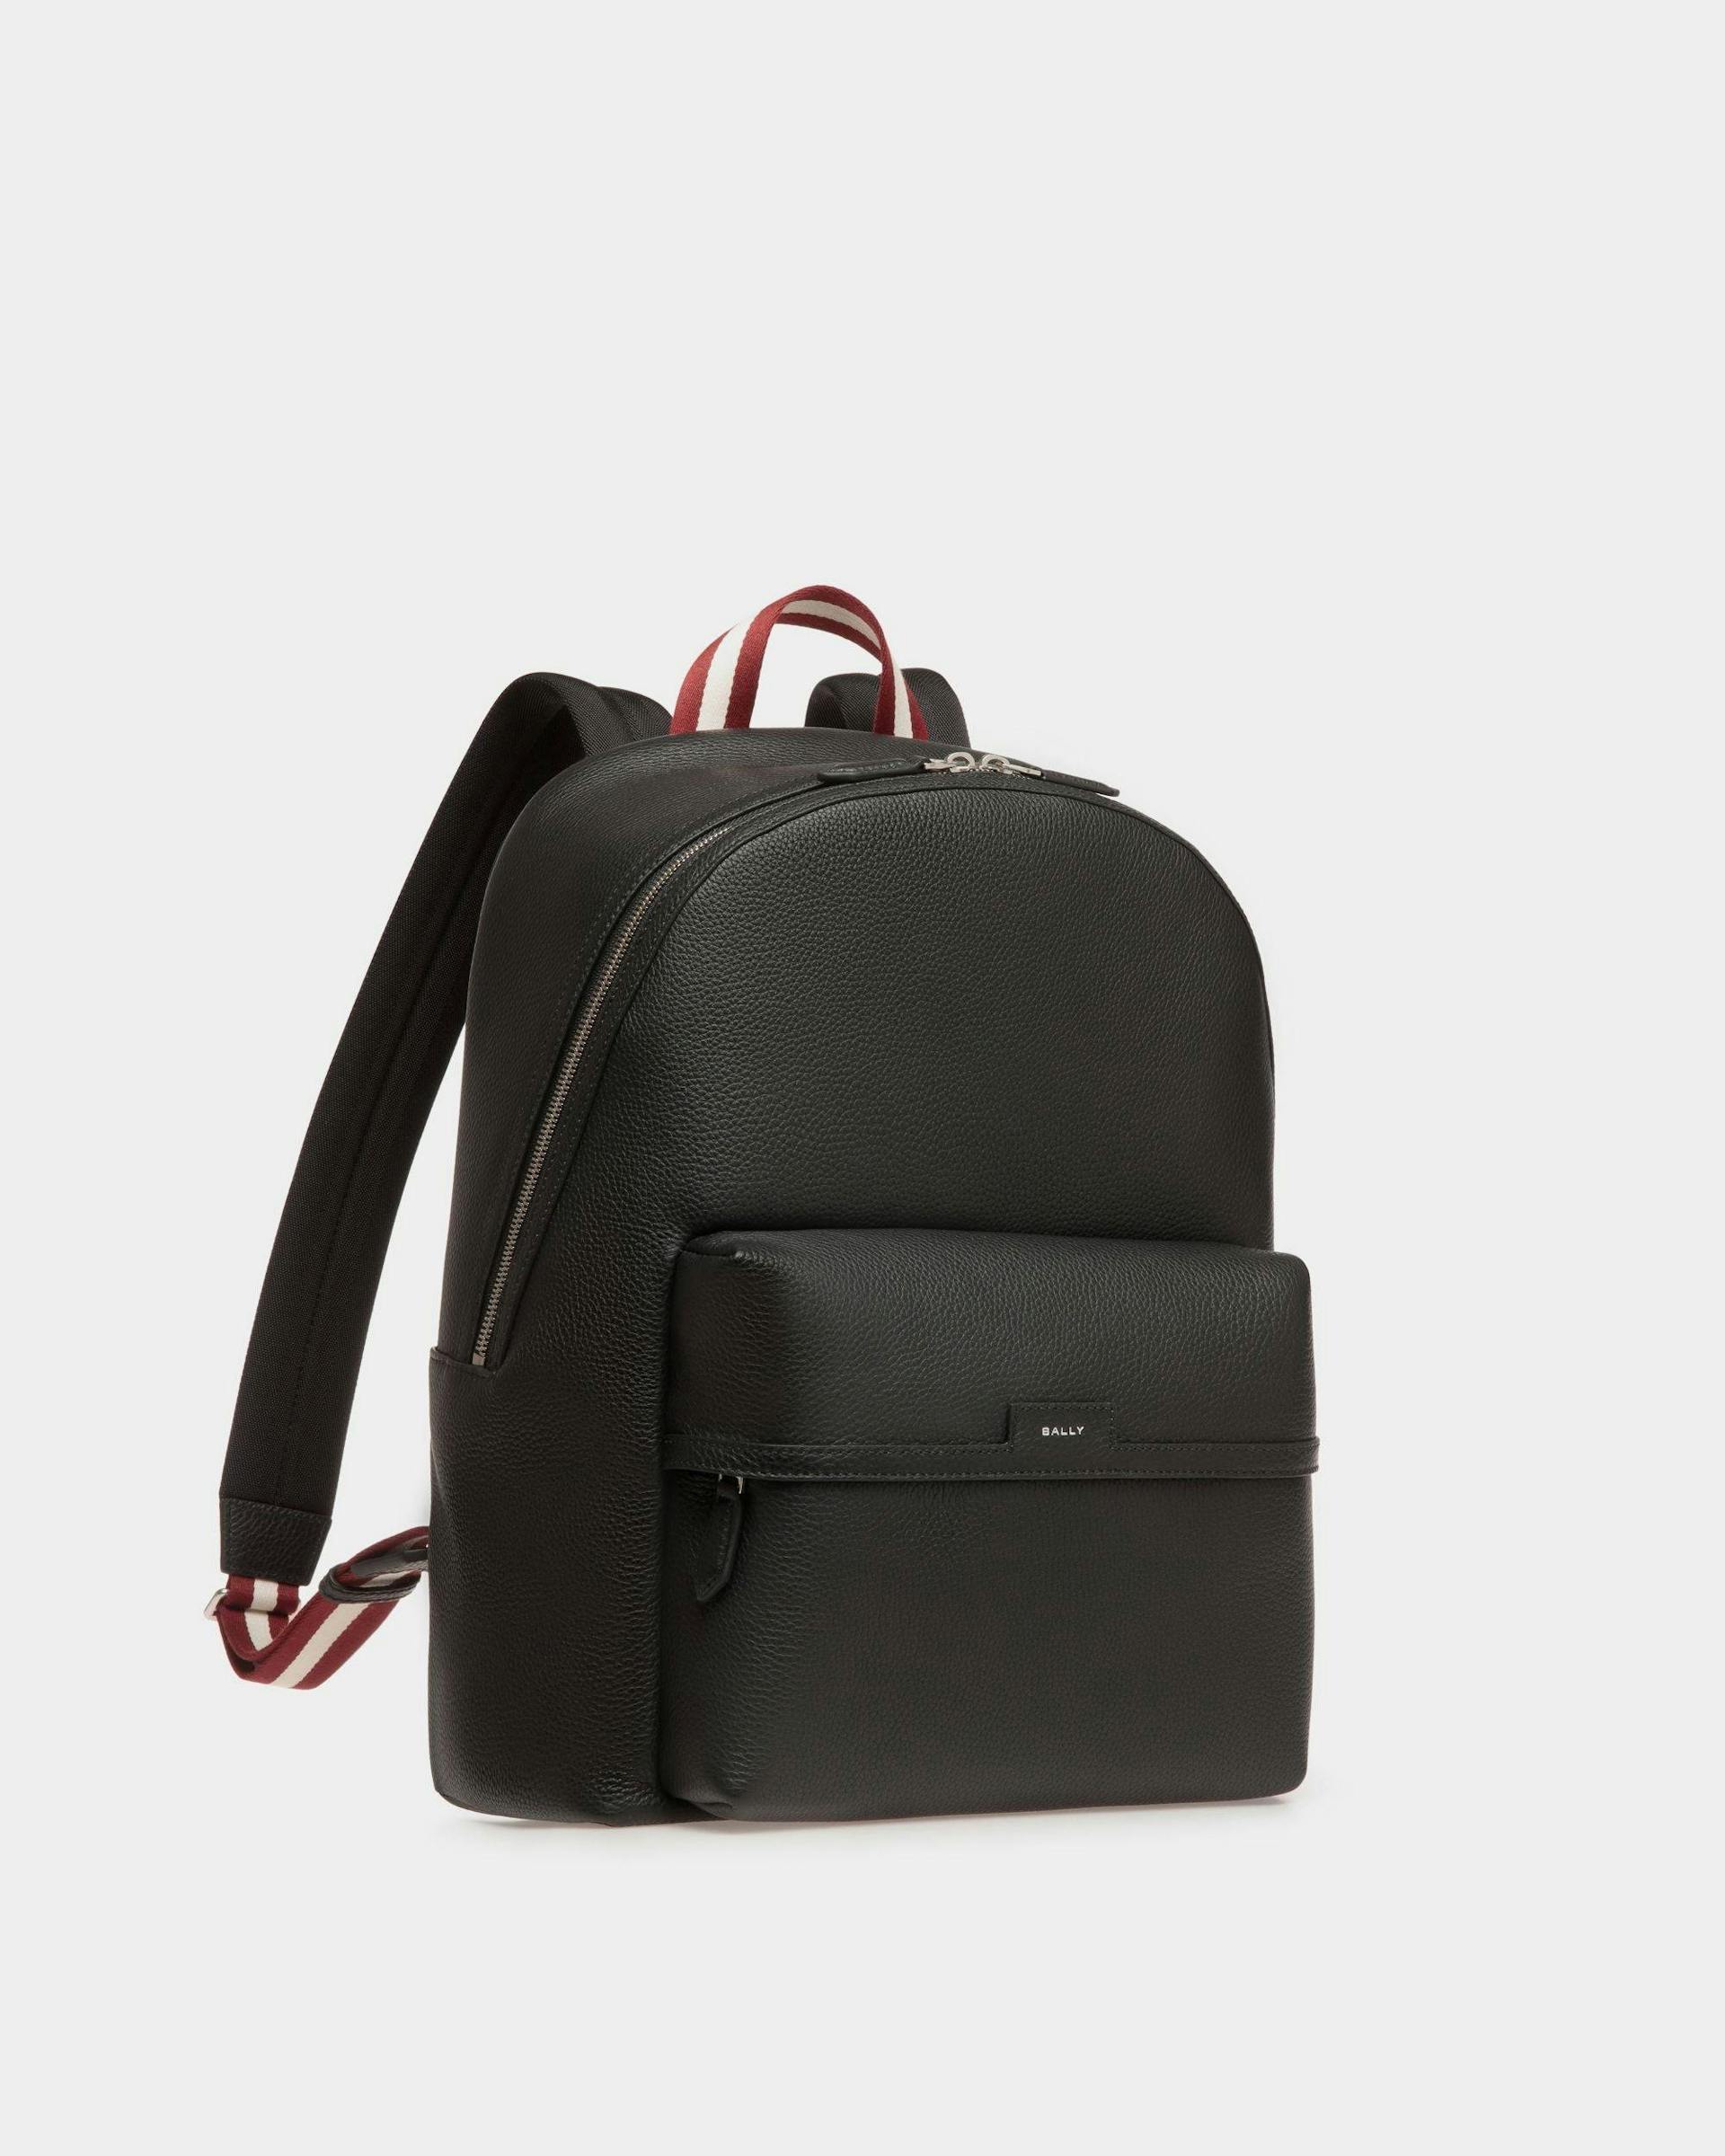 Men's Code Backpack in Black Grained Leather | Bally | Still Life 3/4 Front